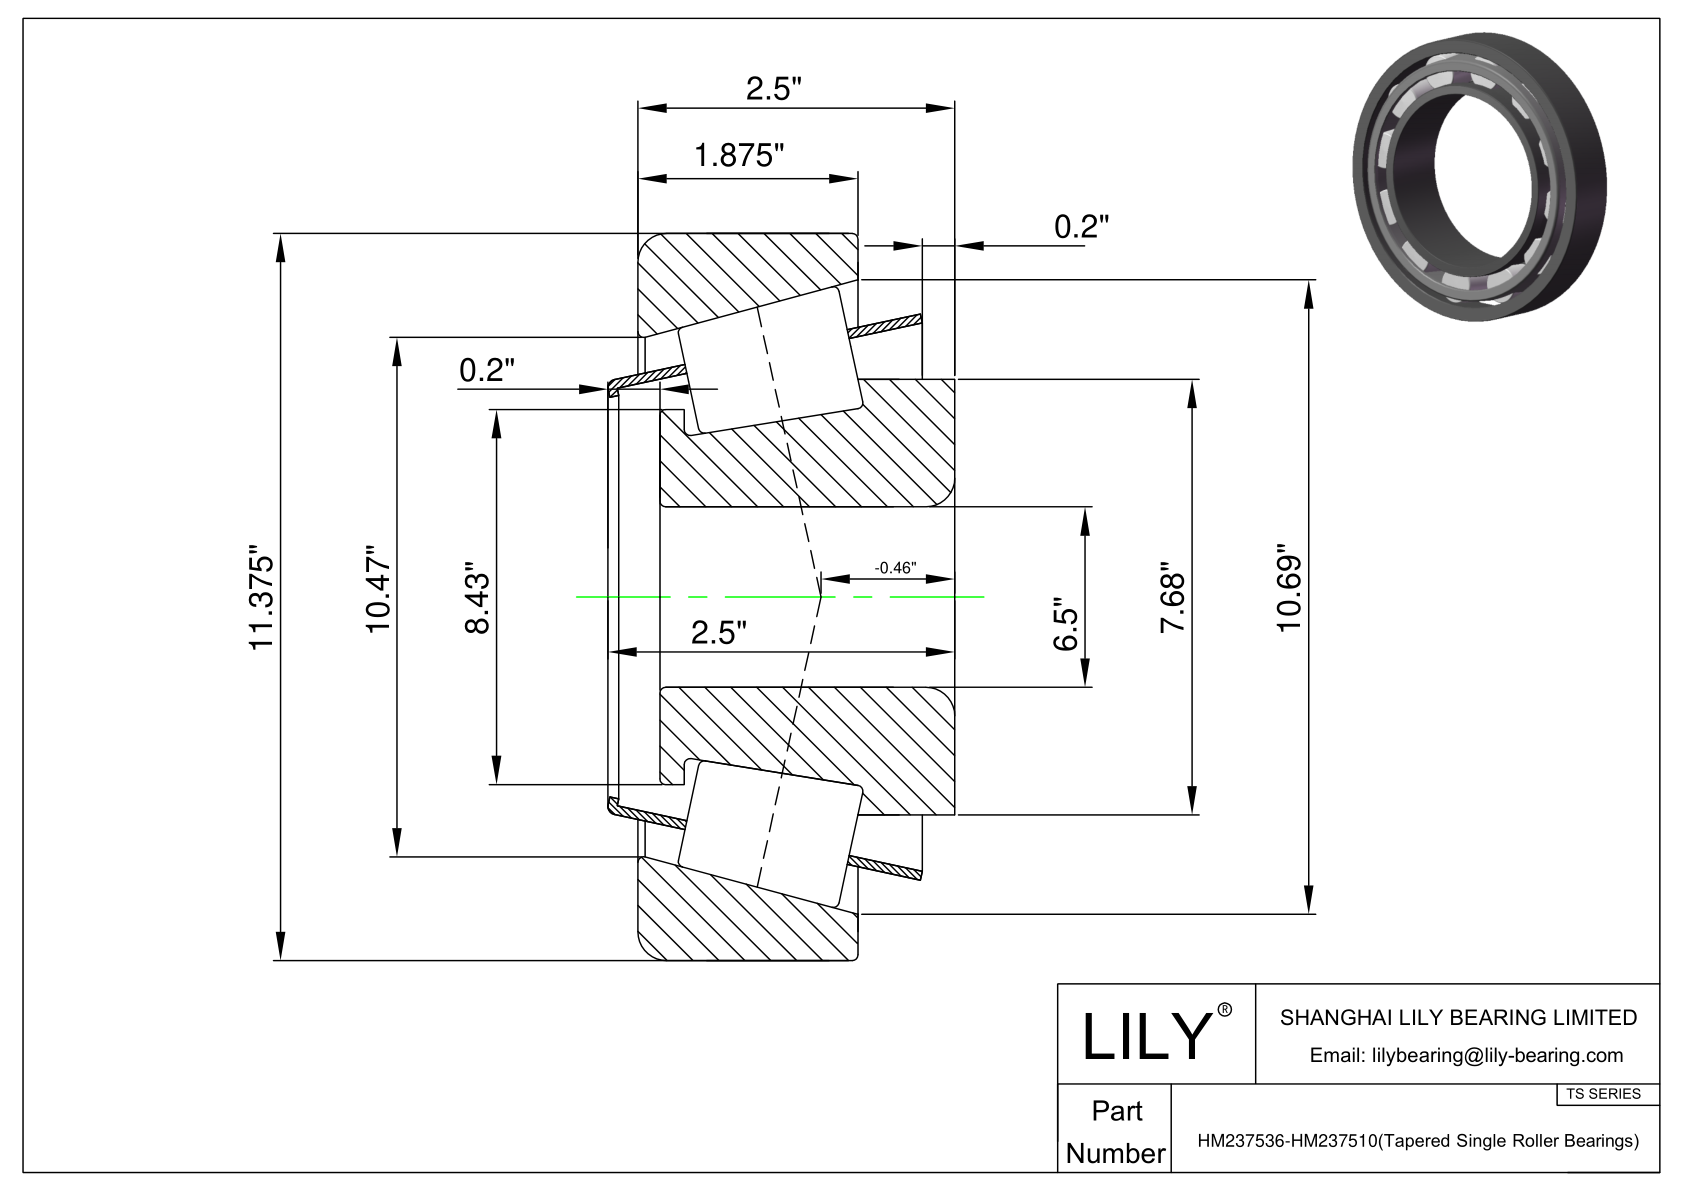 HM237536-HM237510 TS (Tapered Single Roller Bearings) (Imperial) cad drawing